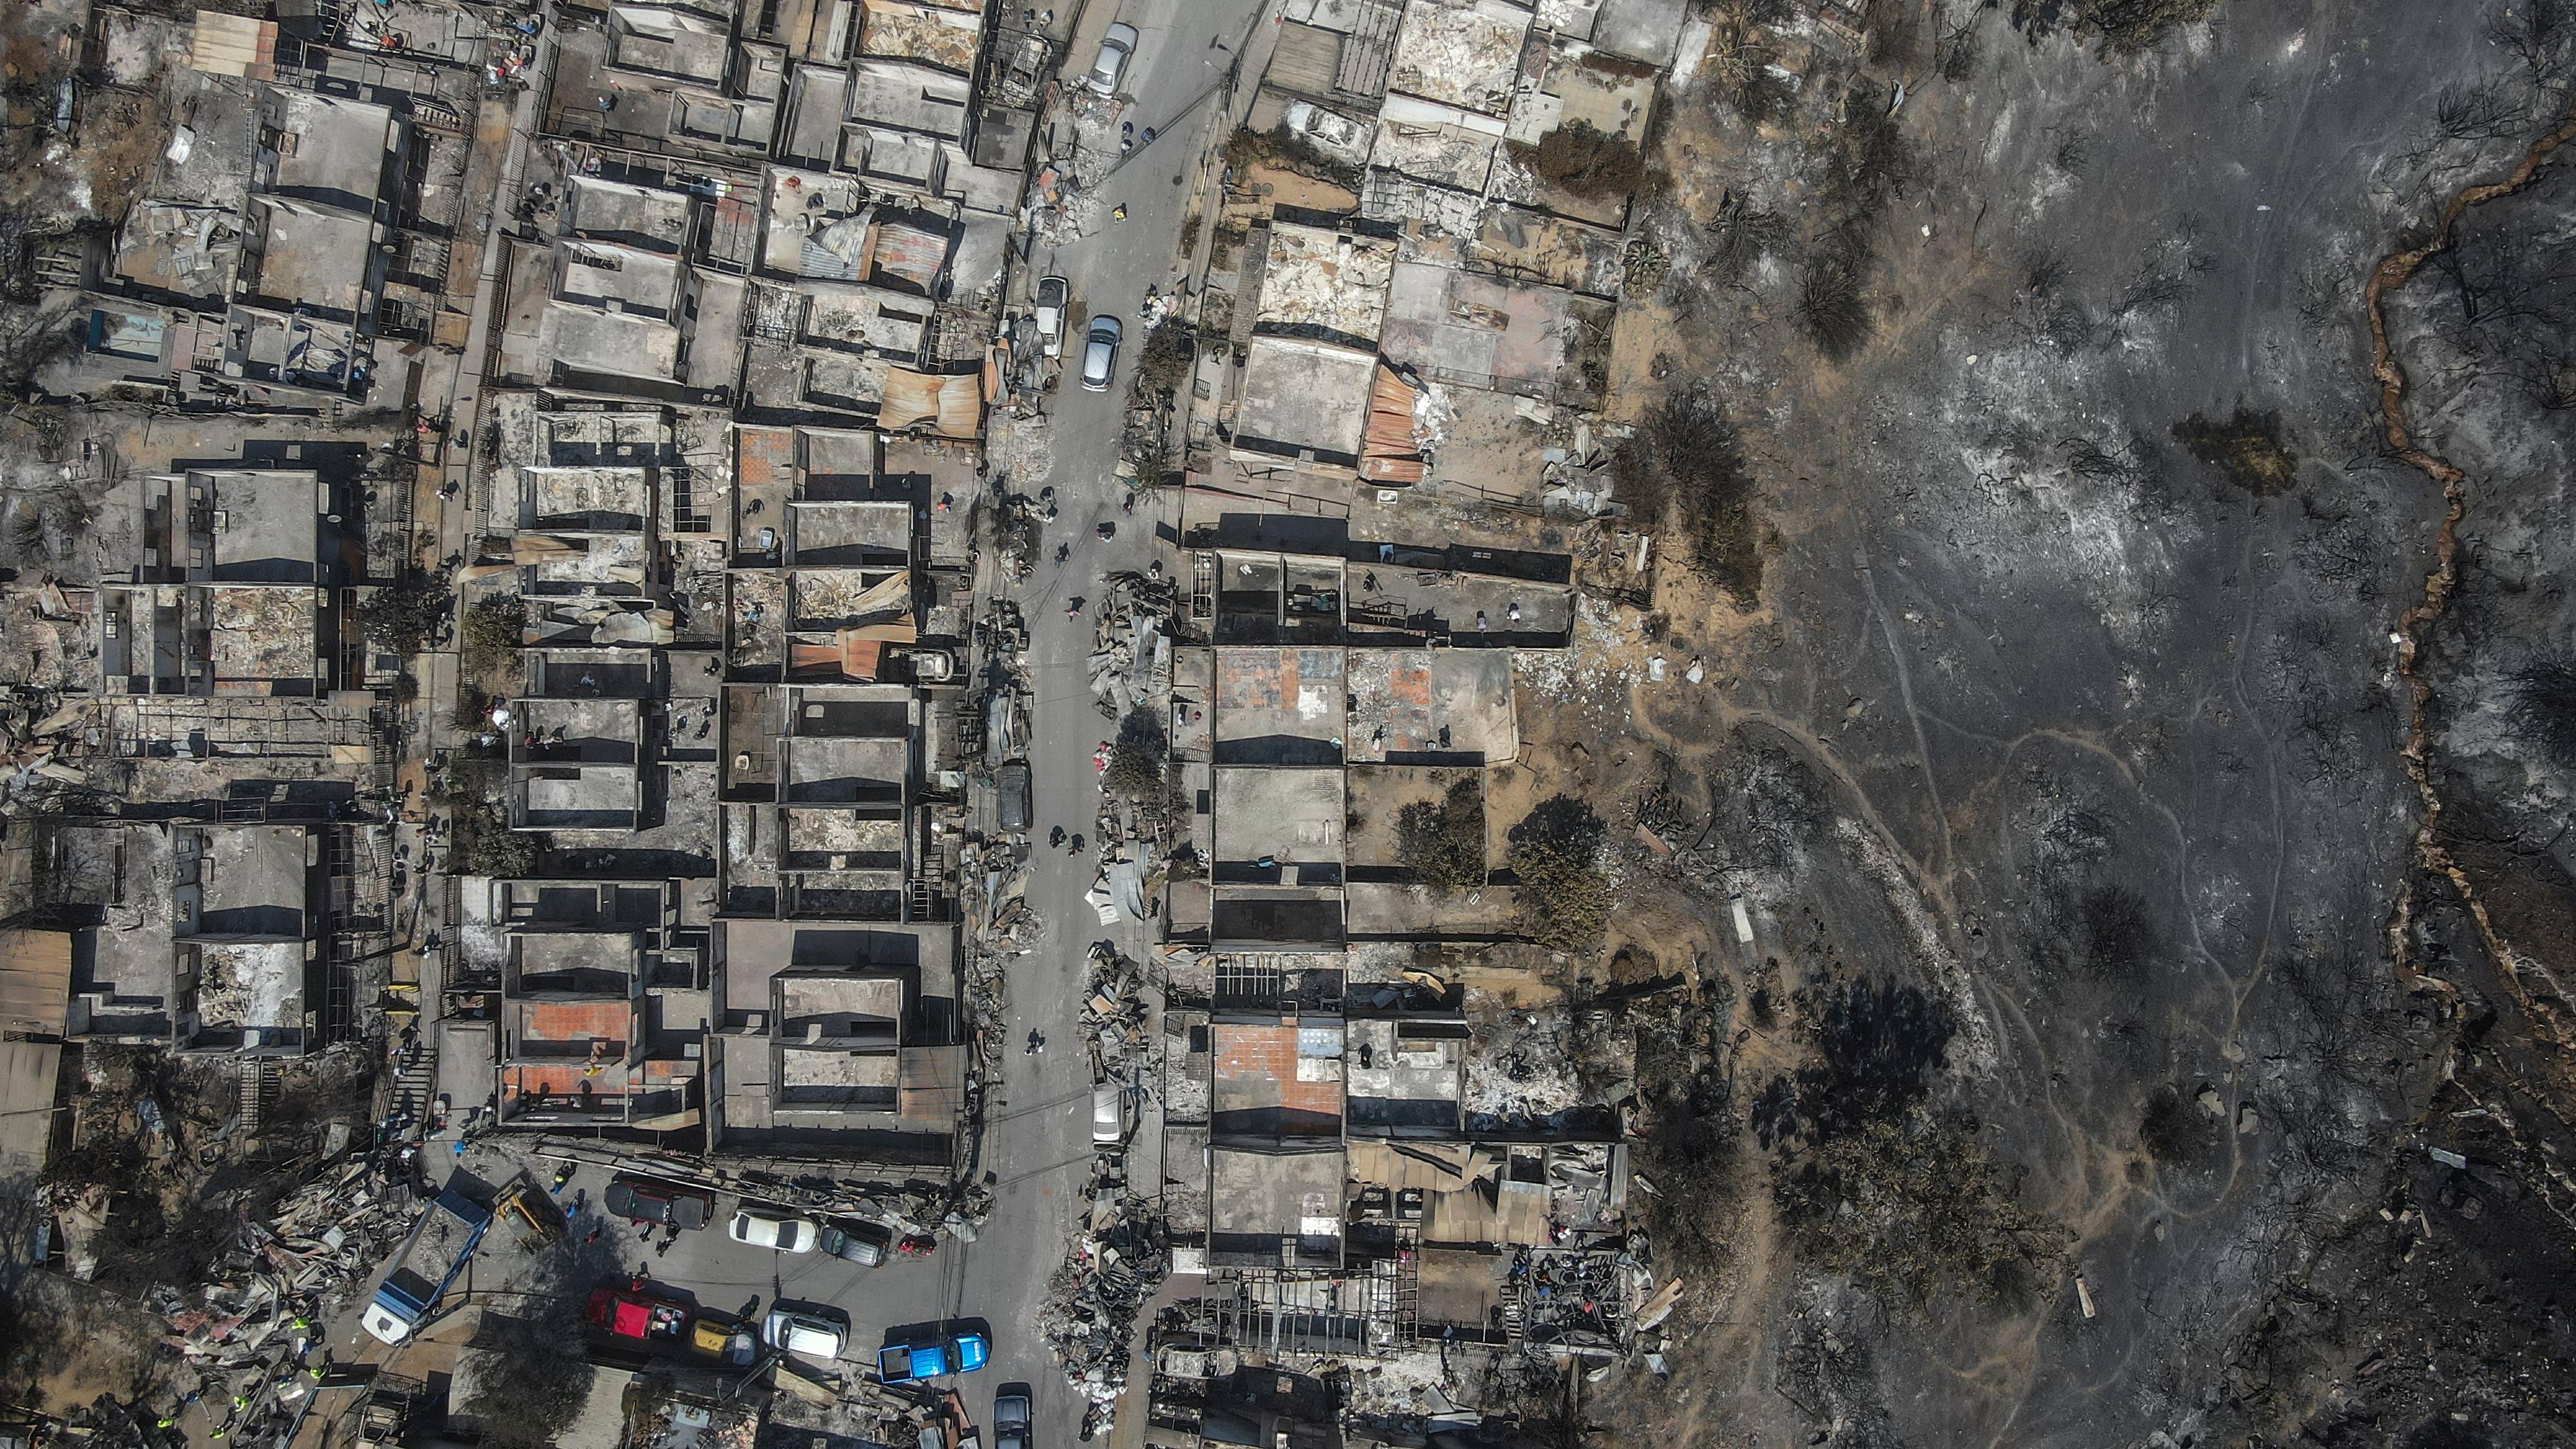 why the fires in chile destroyed so many lives